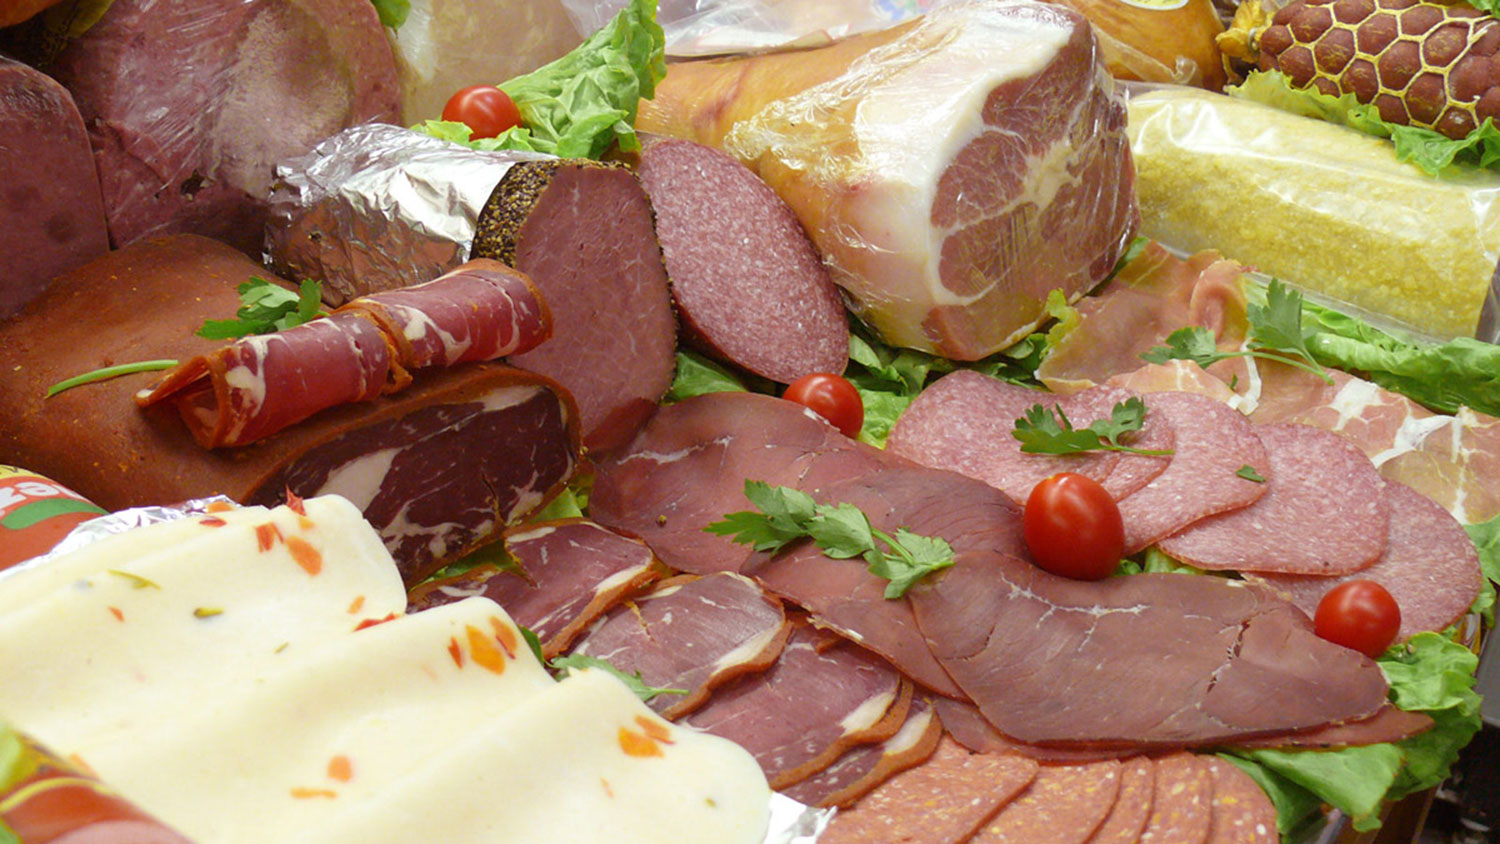 Different charcuterie meats.